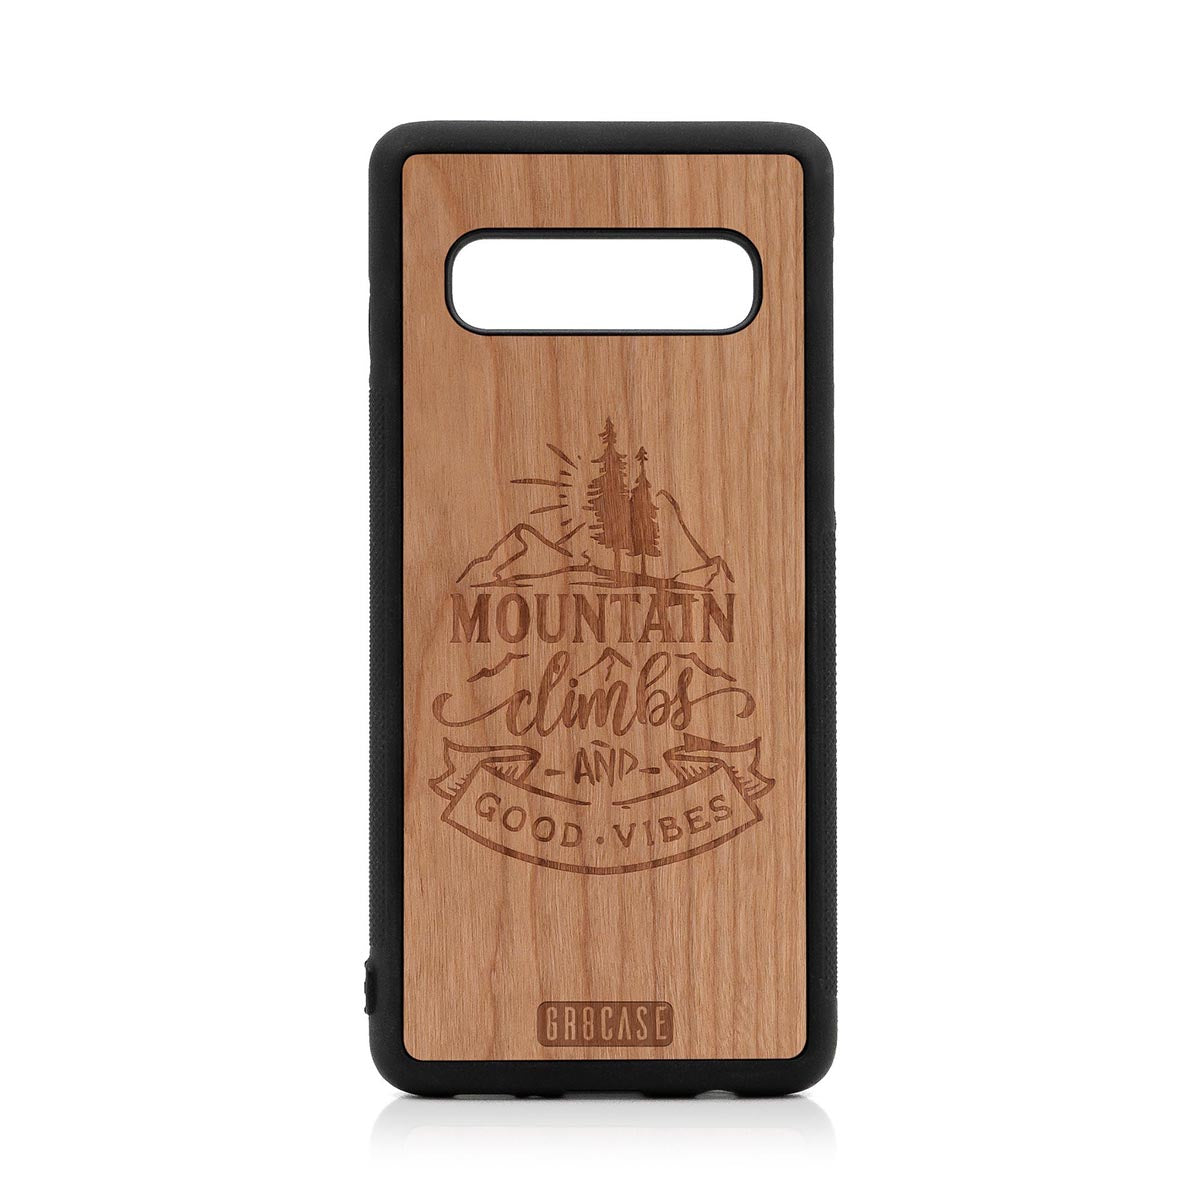 Mountain Climbs And Good Vibes Design Wood Case For Samsung Galaxy S10 by GR8CASE